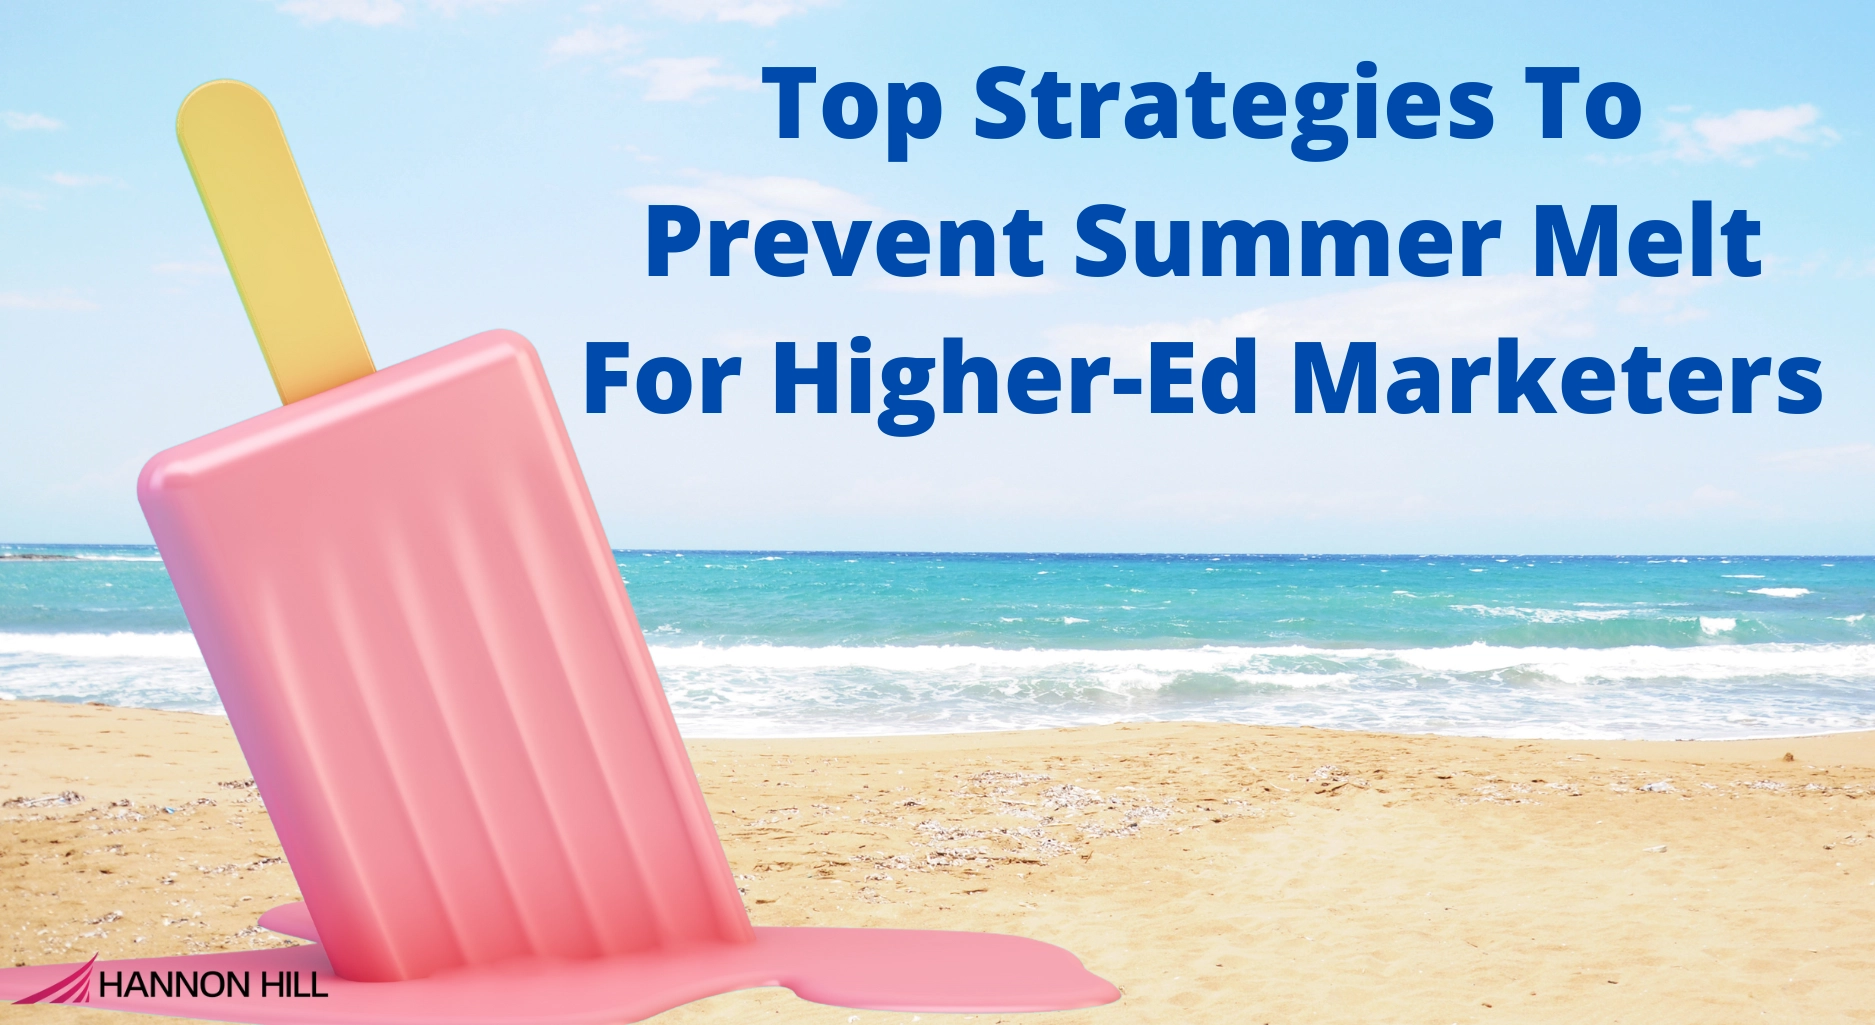 image from Top Strategies to Prevent Summer Melt for Higher Ed-Marketers post